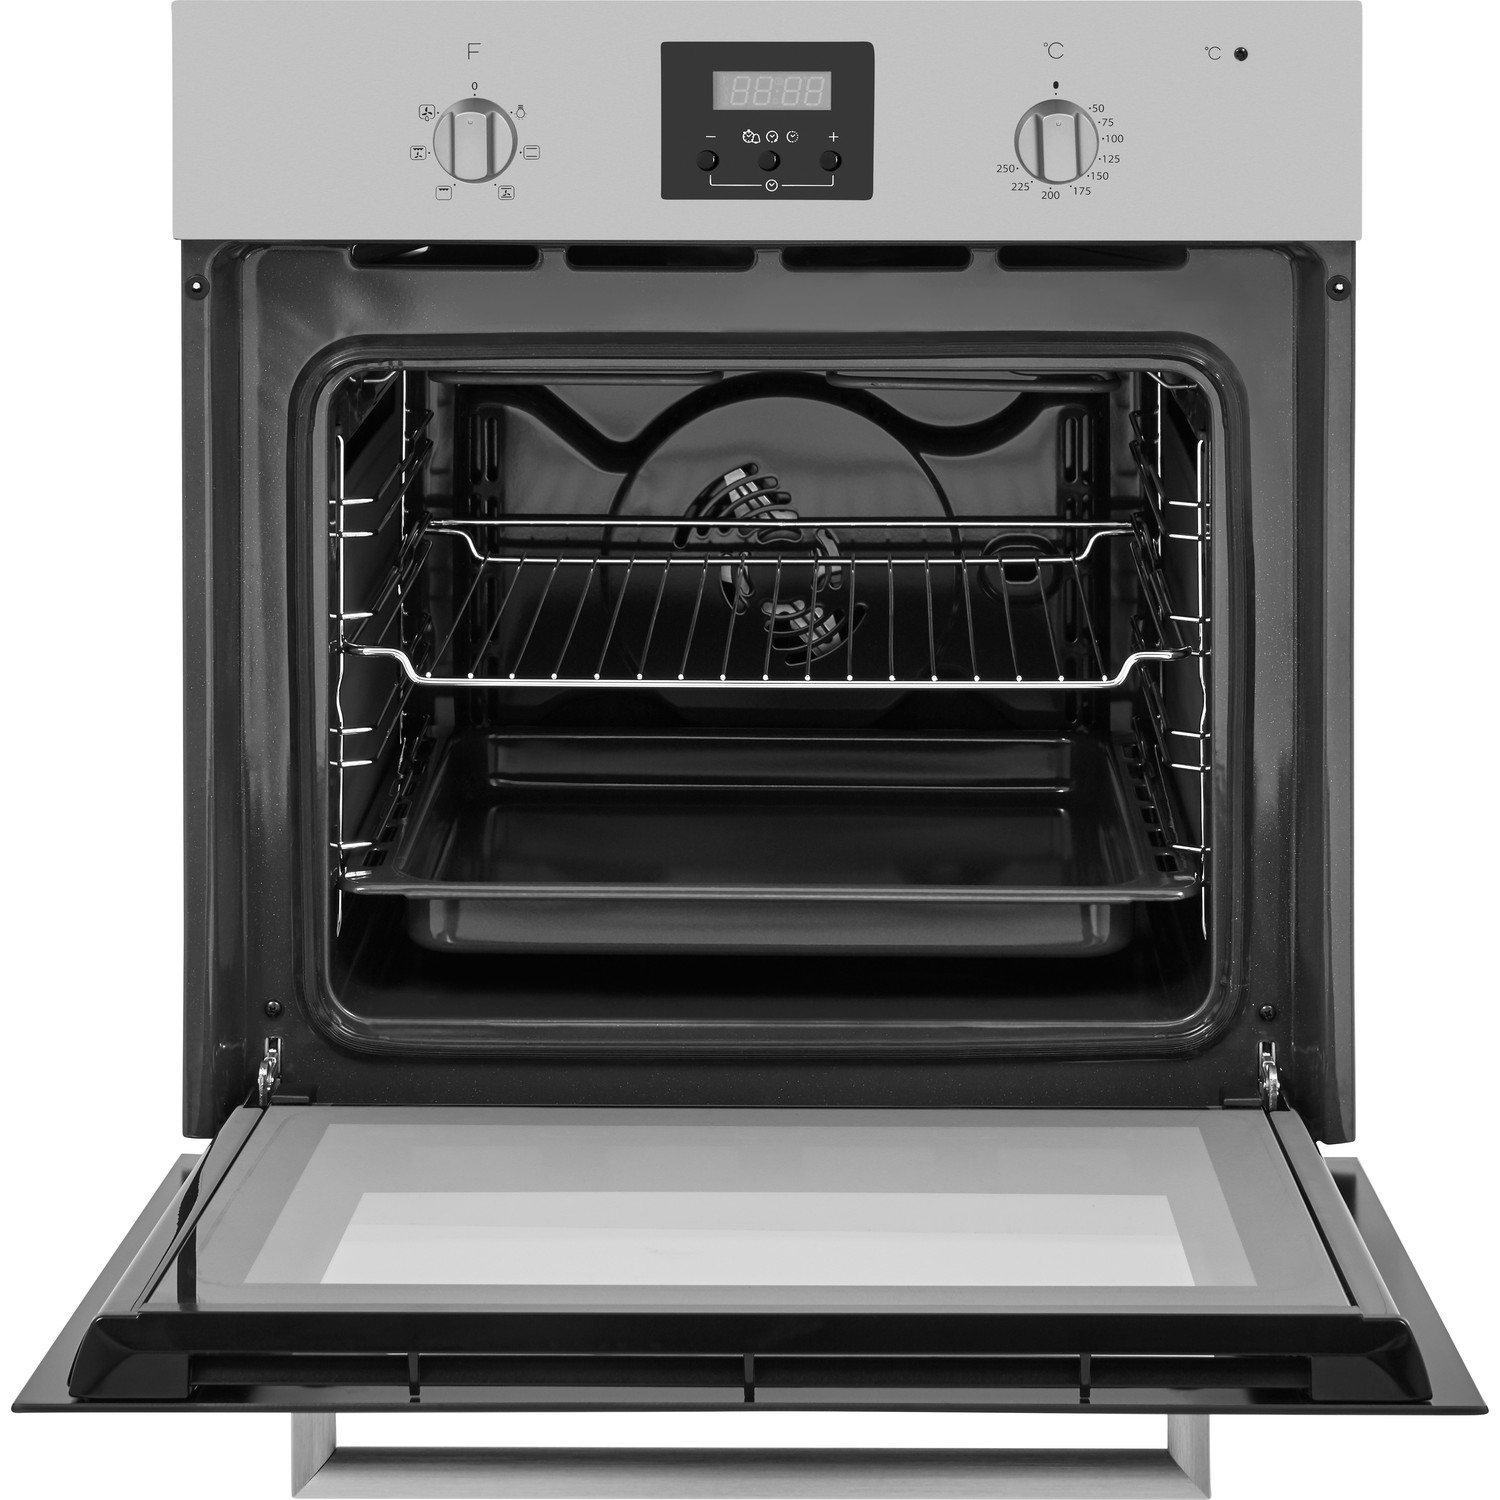 Hotpoint AOY54CIX 59.5cm Built In Electric Single Oven - Silver - 3